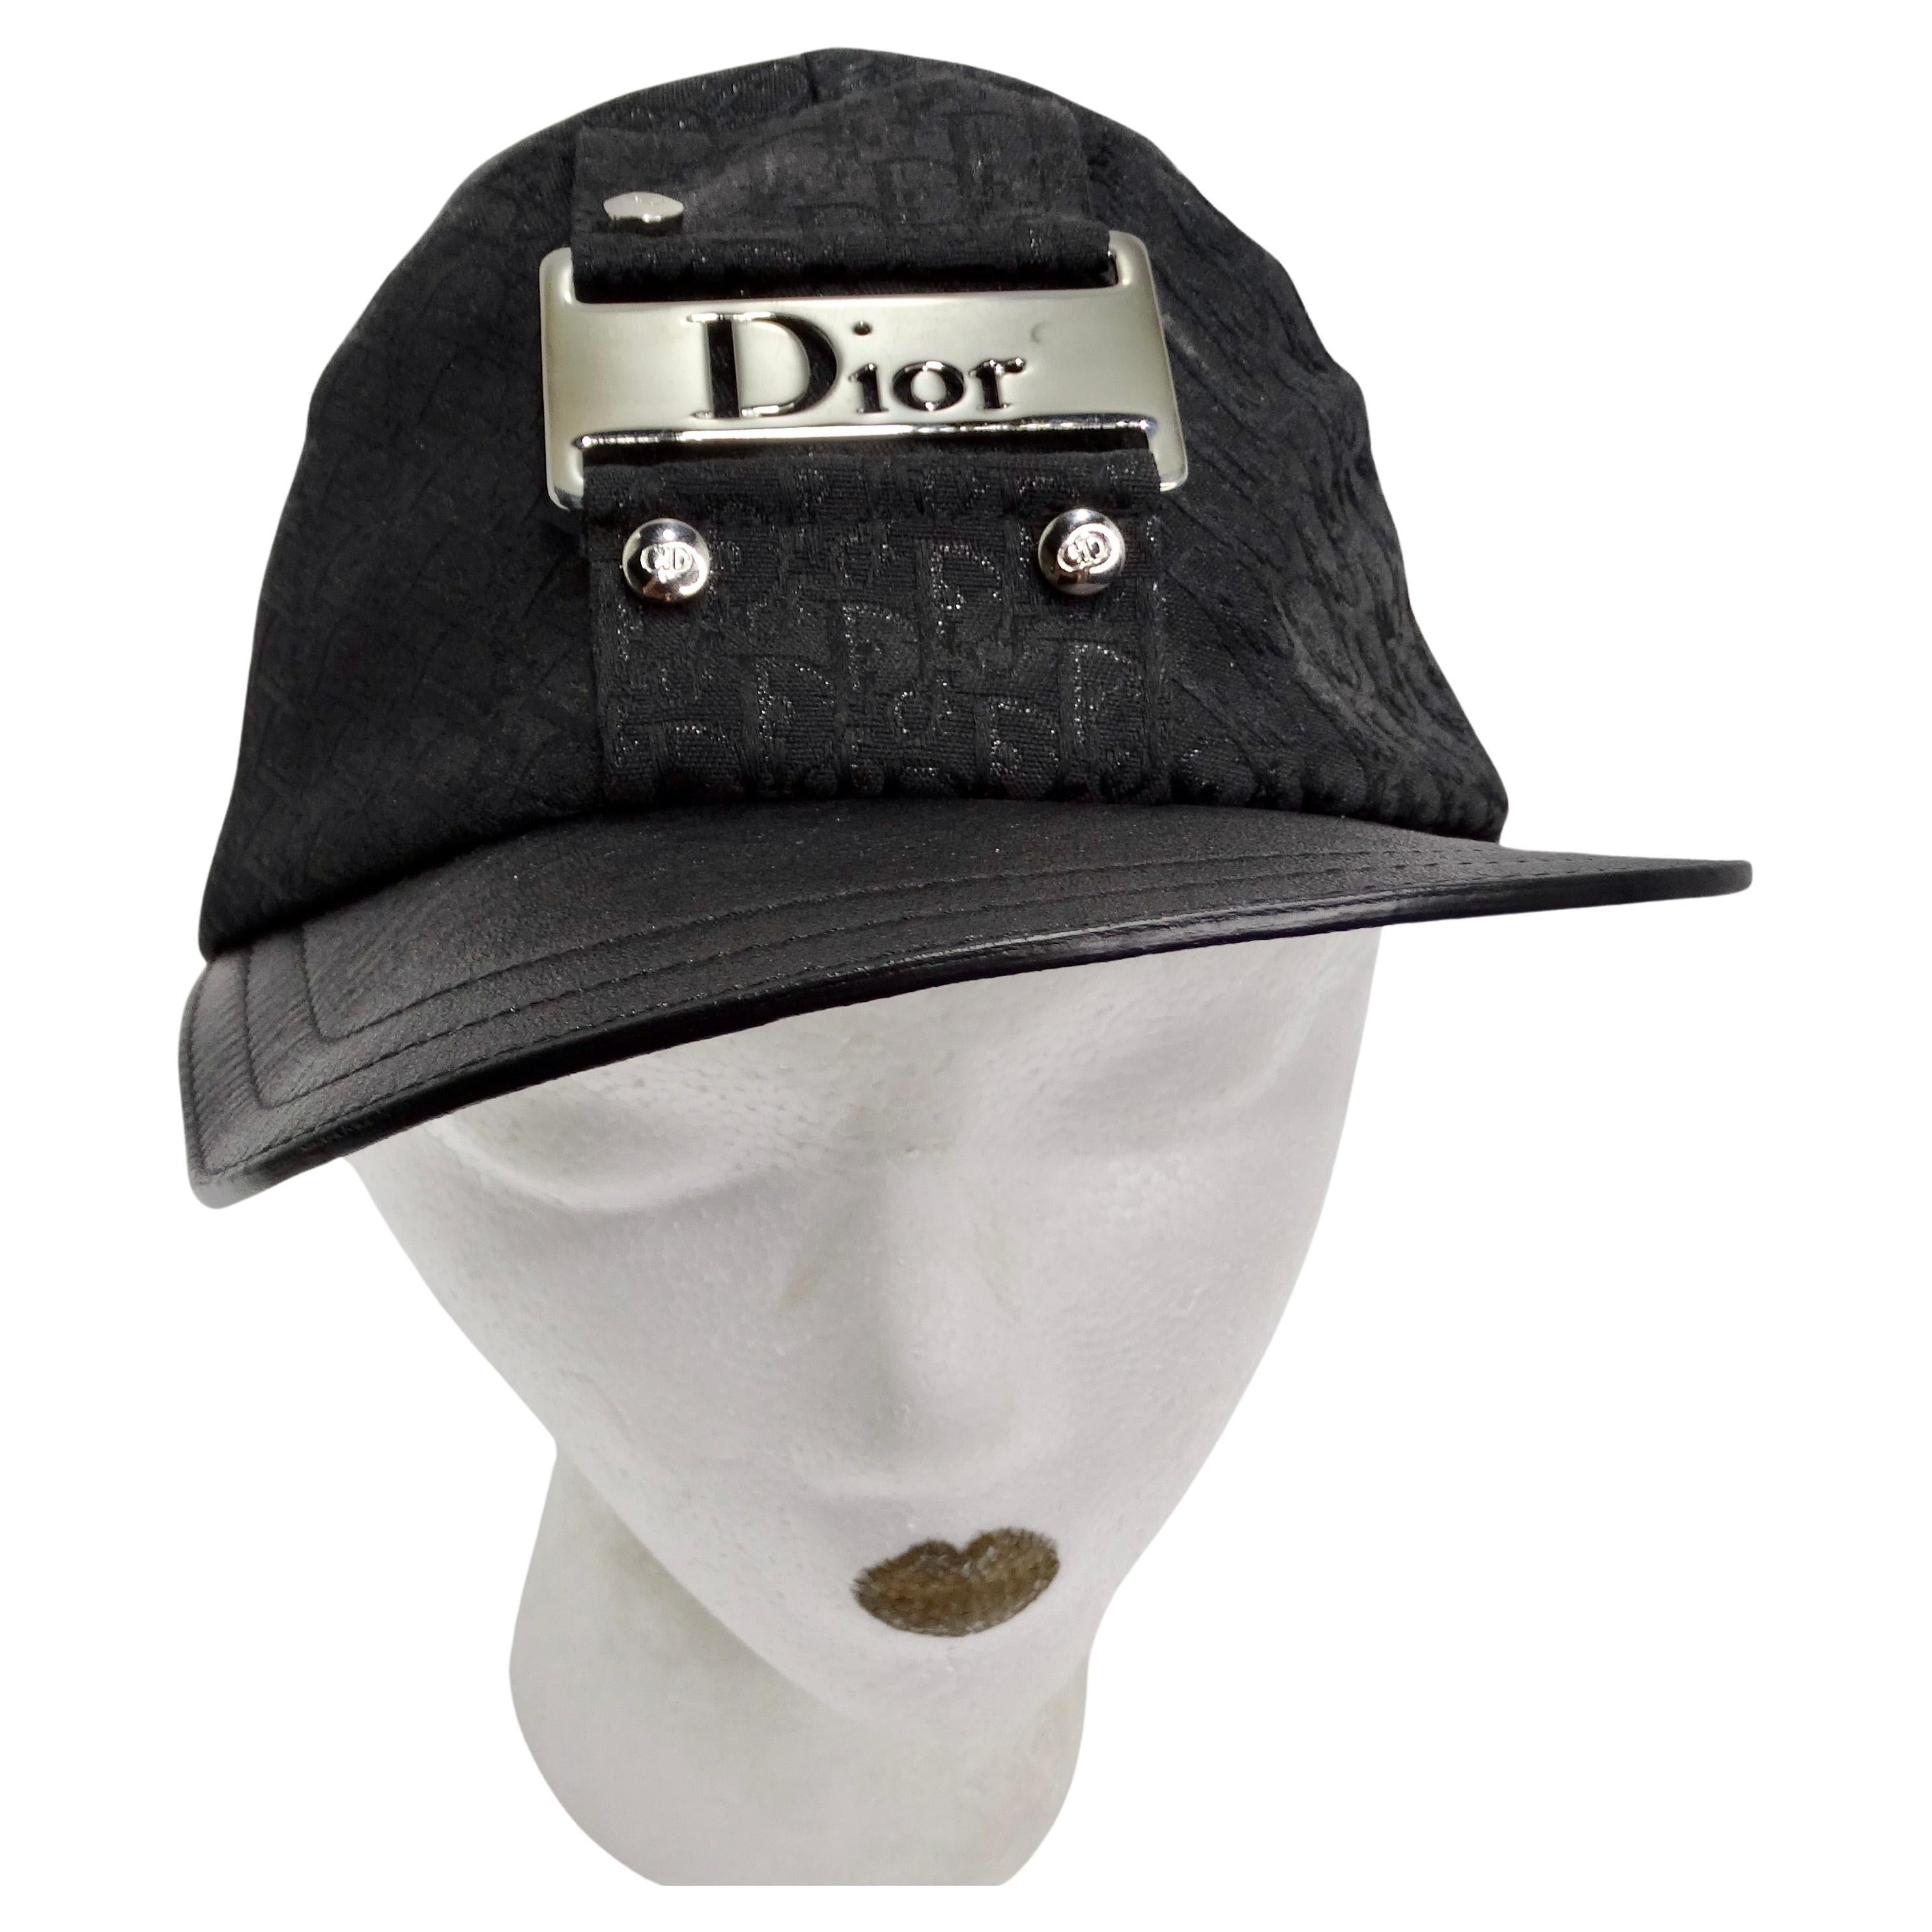 Introducing the Christian Dior by John Galliano 2002 Trotter Monogram Baseball Cap, a timeless and iconic accessory that epitomizes luxury and style. Crafted with the signature Dior trotter monogram in black canvas, this baseball-style hat exudes